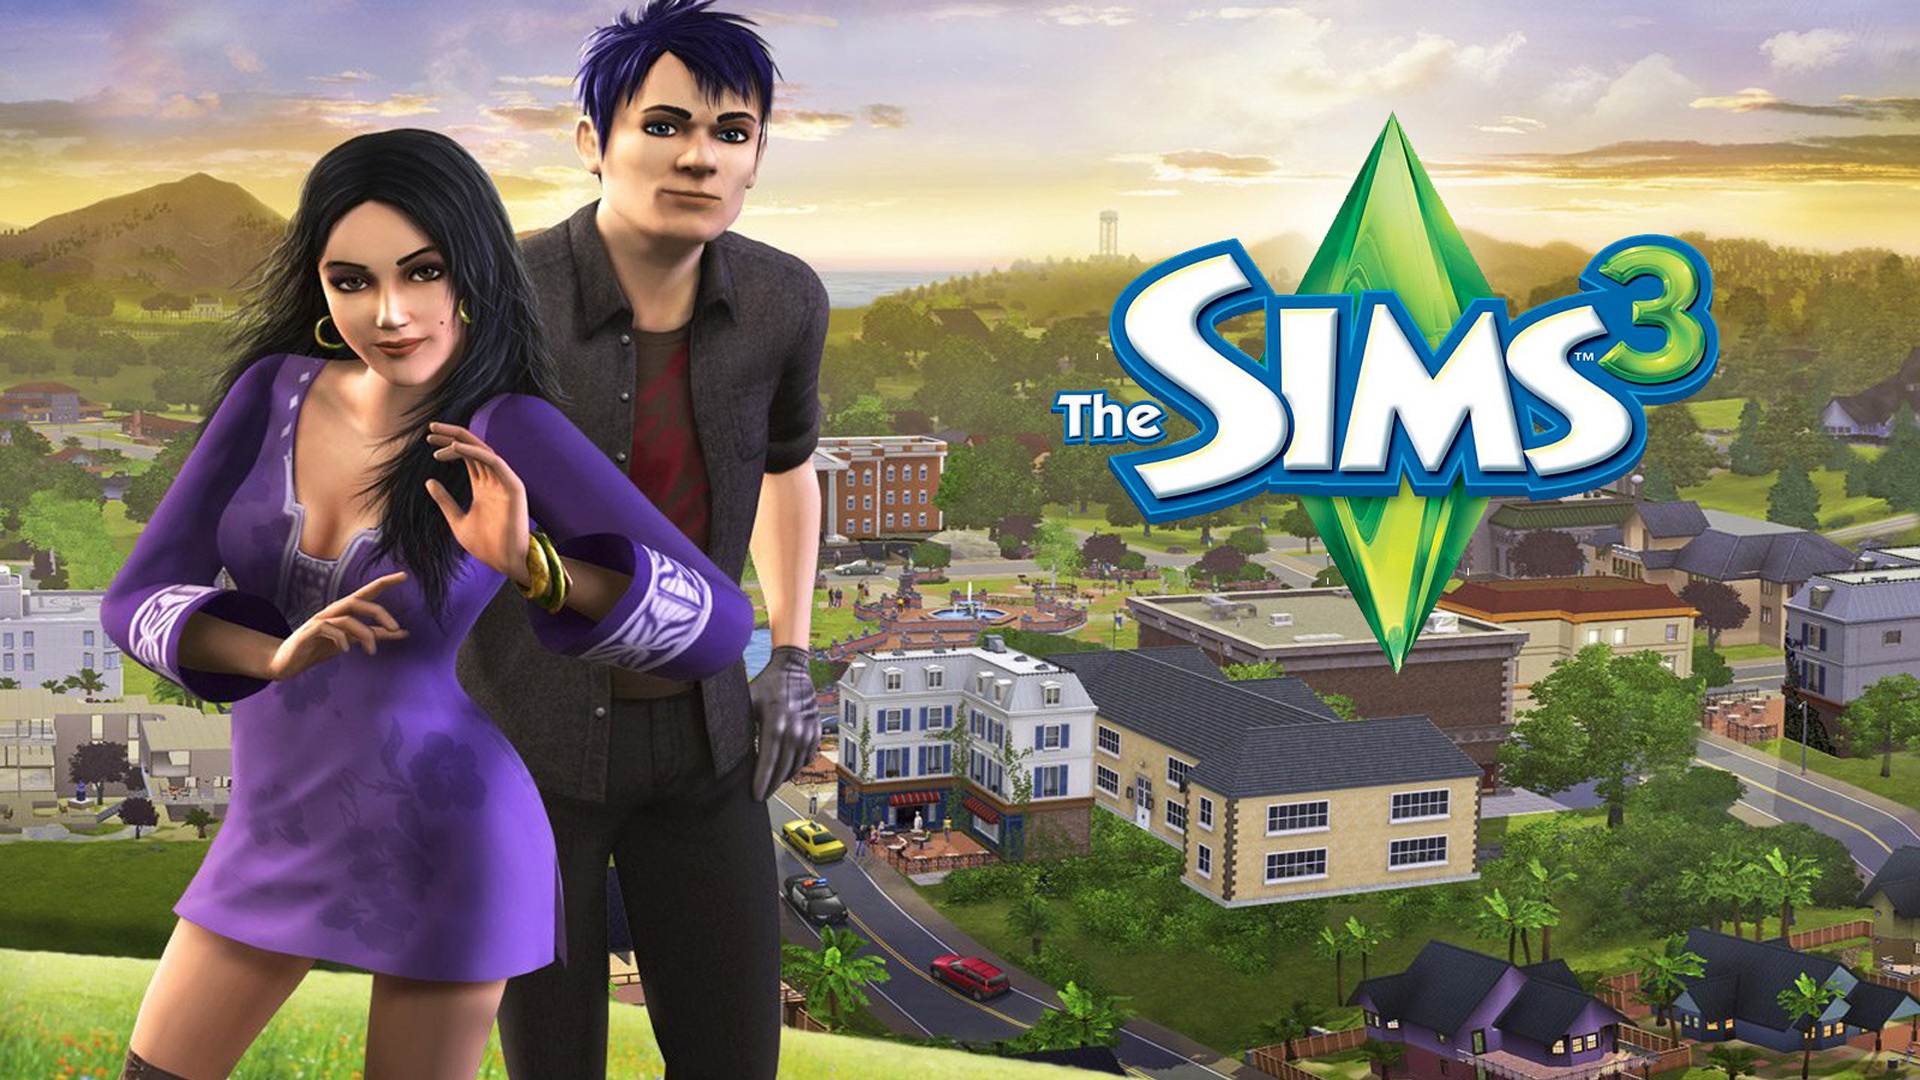 The sims 1 free download full version for pc safe